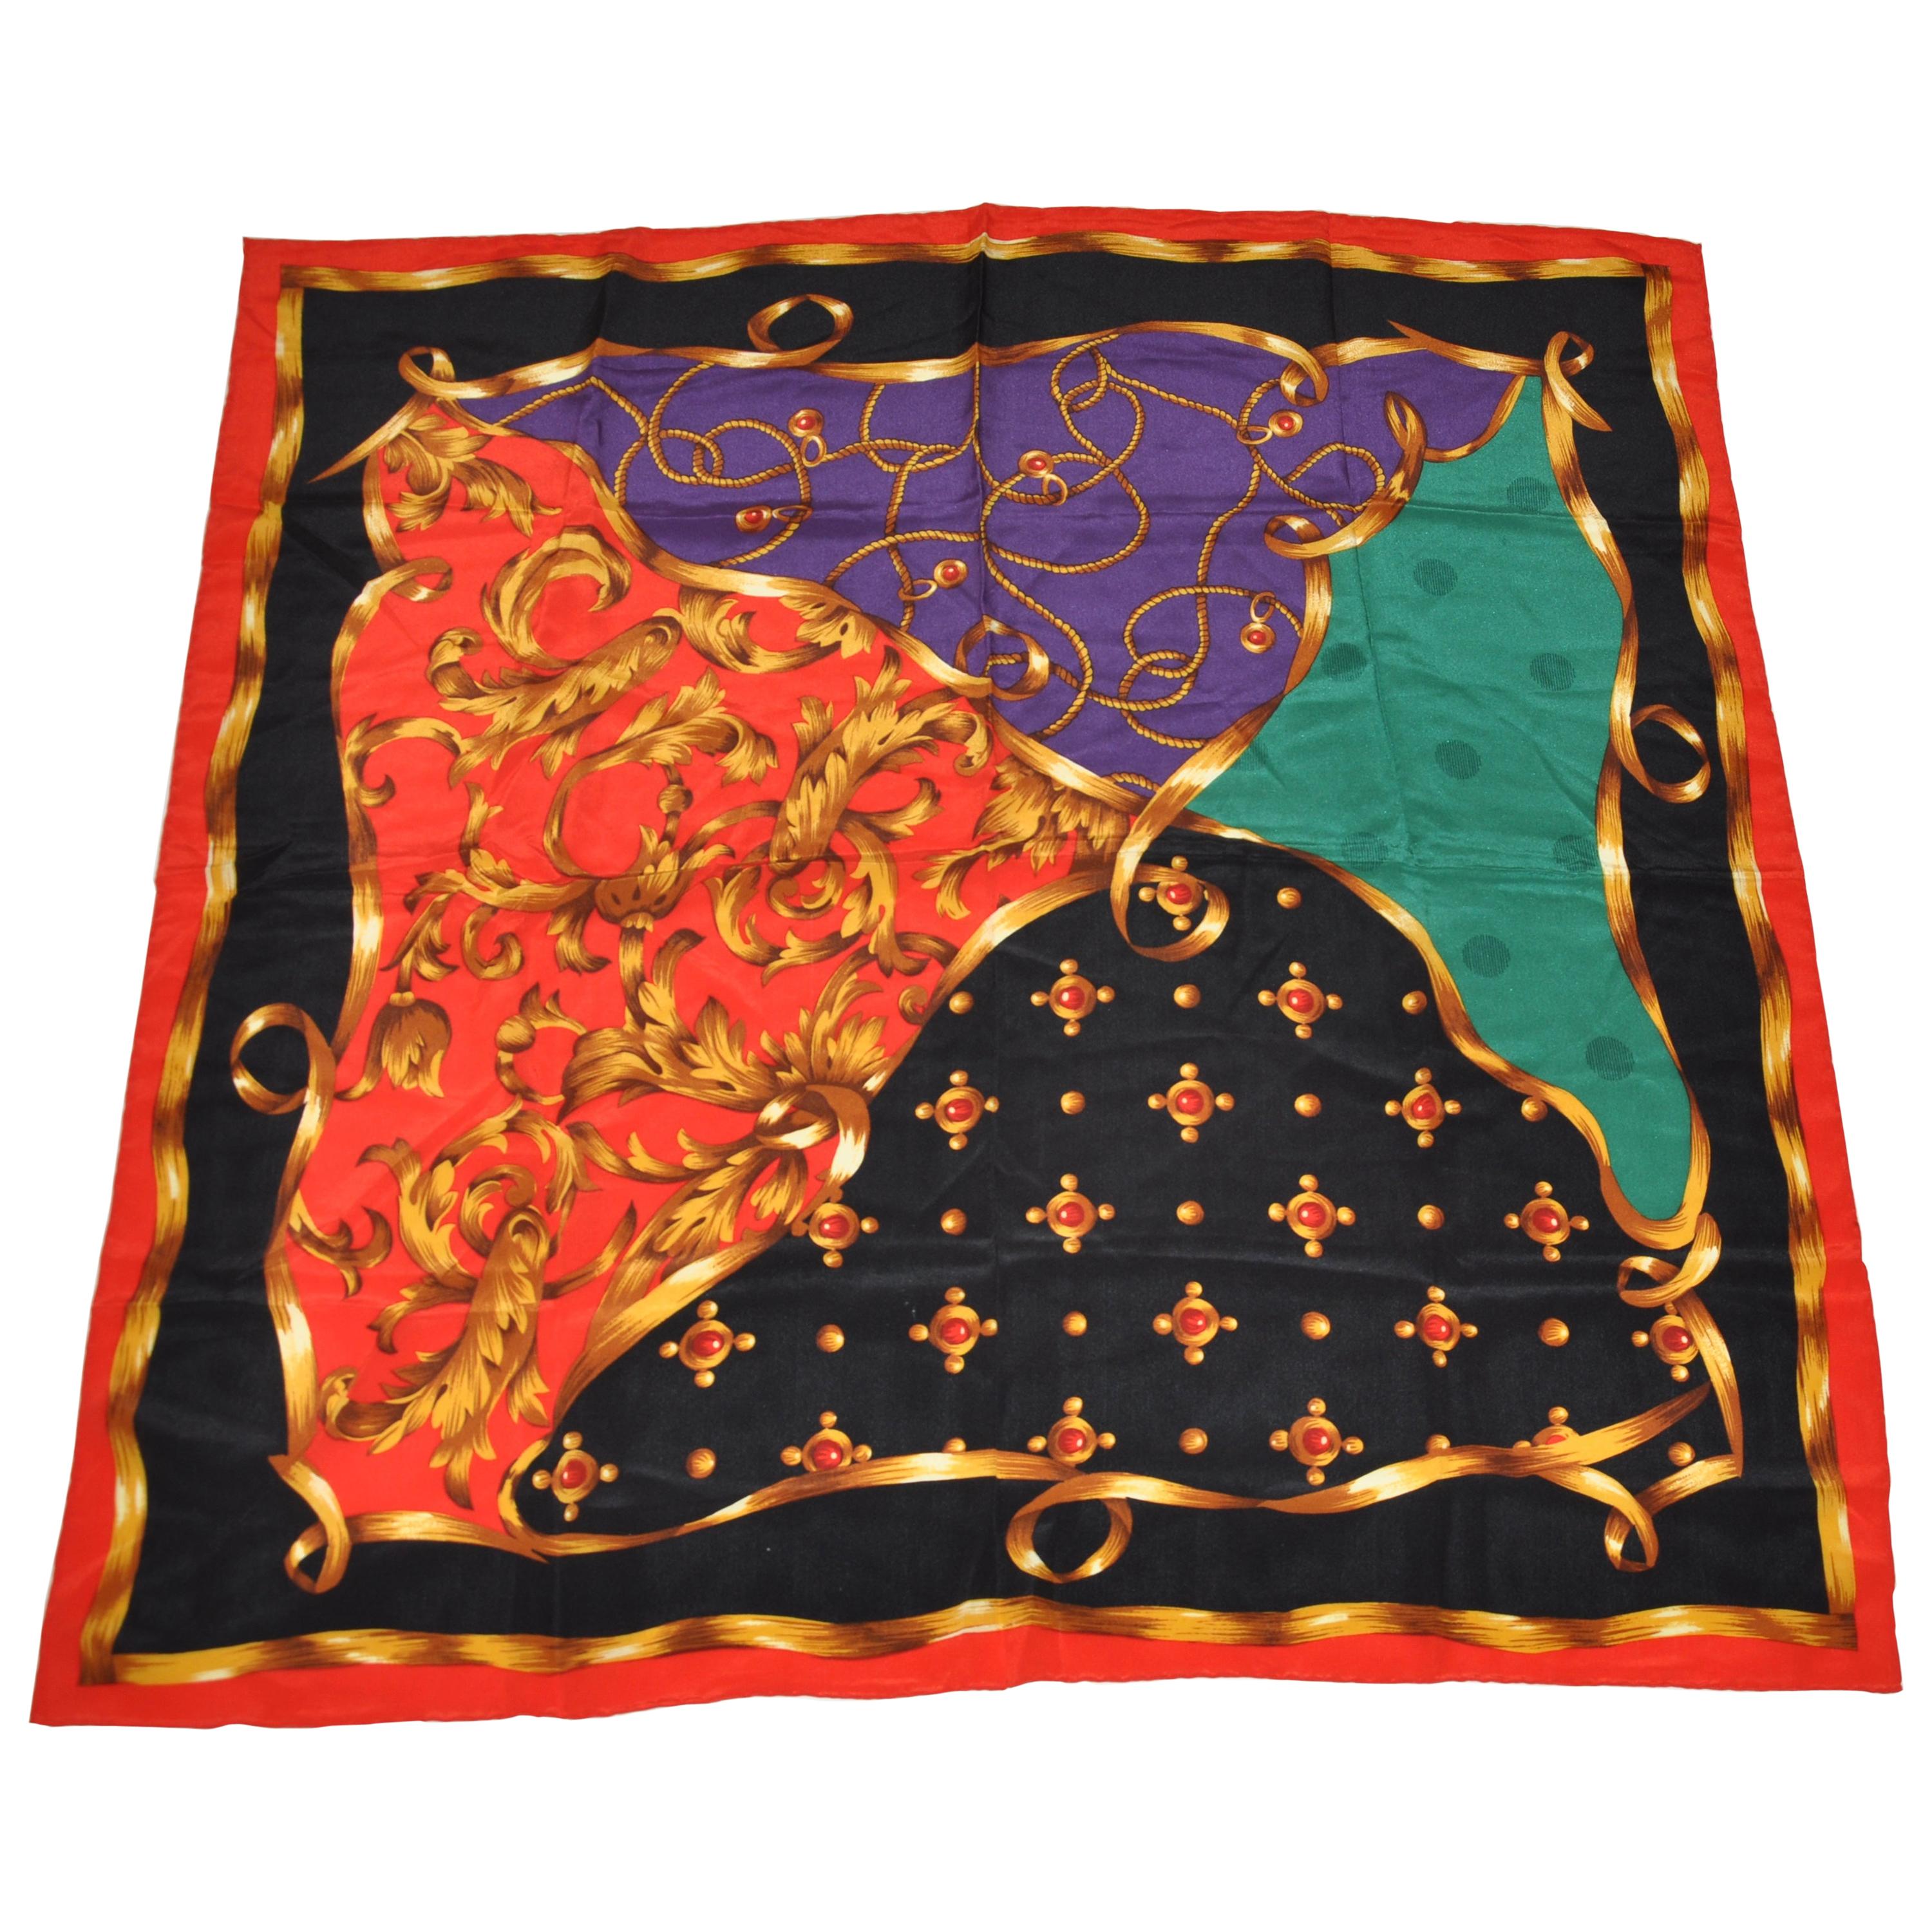 Large Royal Red Borders With Golden Accents Patterned Silk Scarf